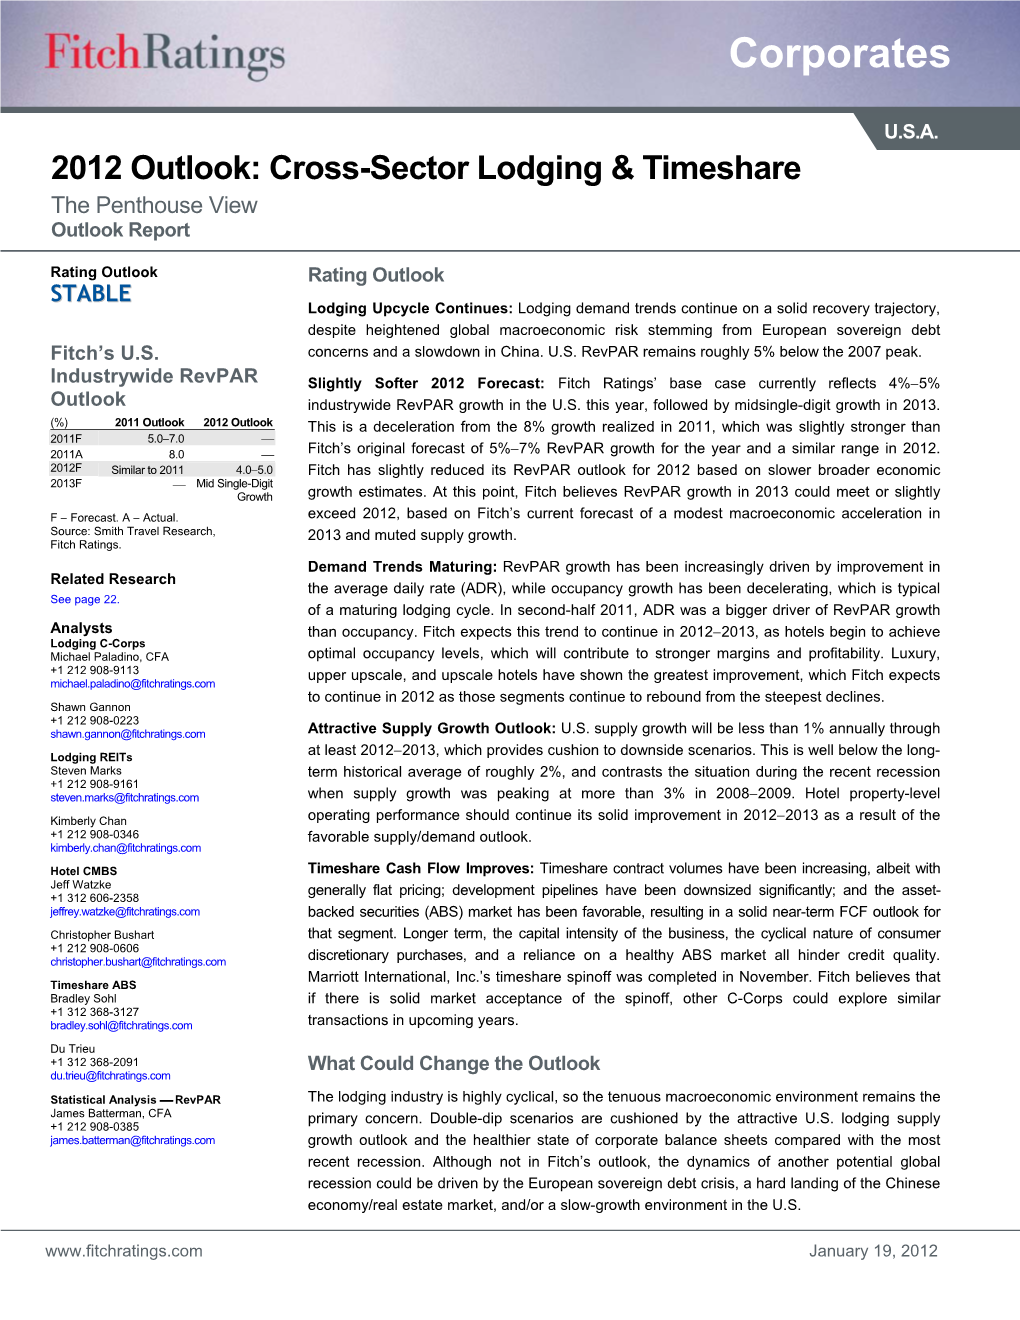 2012 Outlook: Cross-Sector Lodging & Timeshare